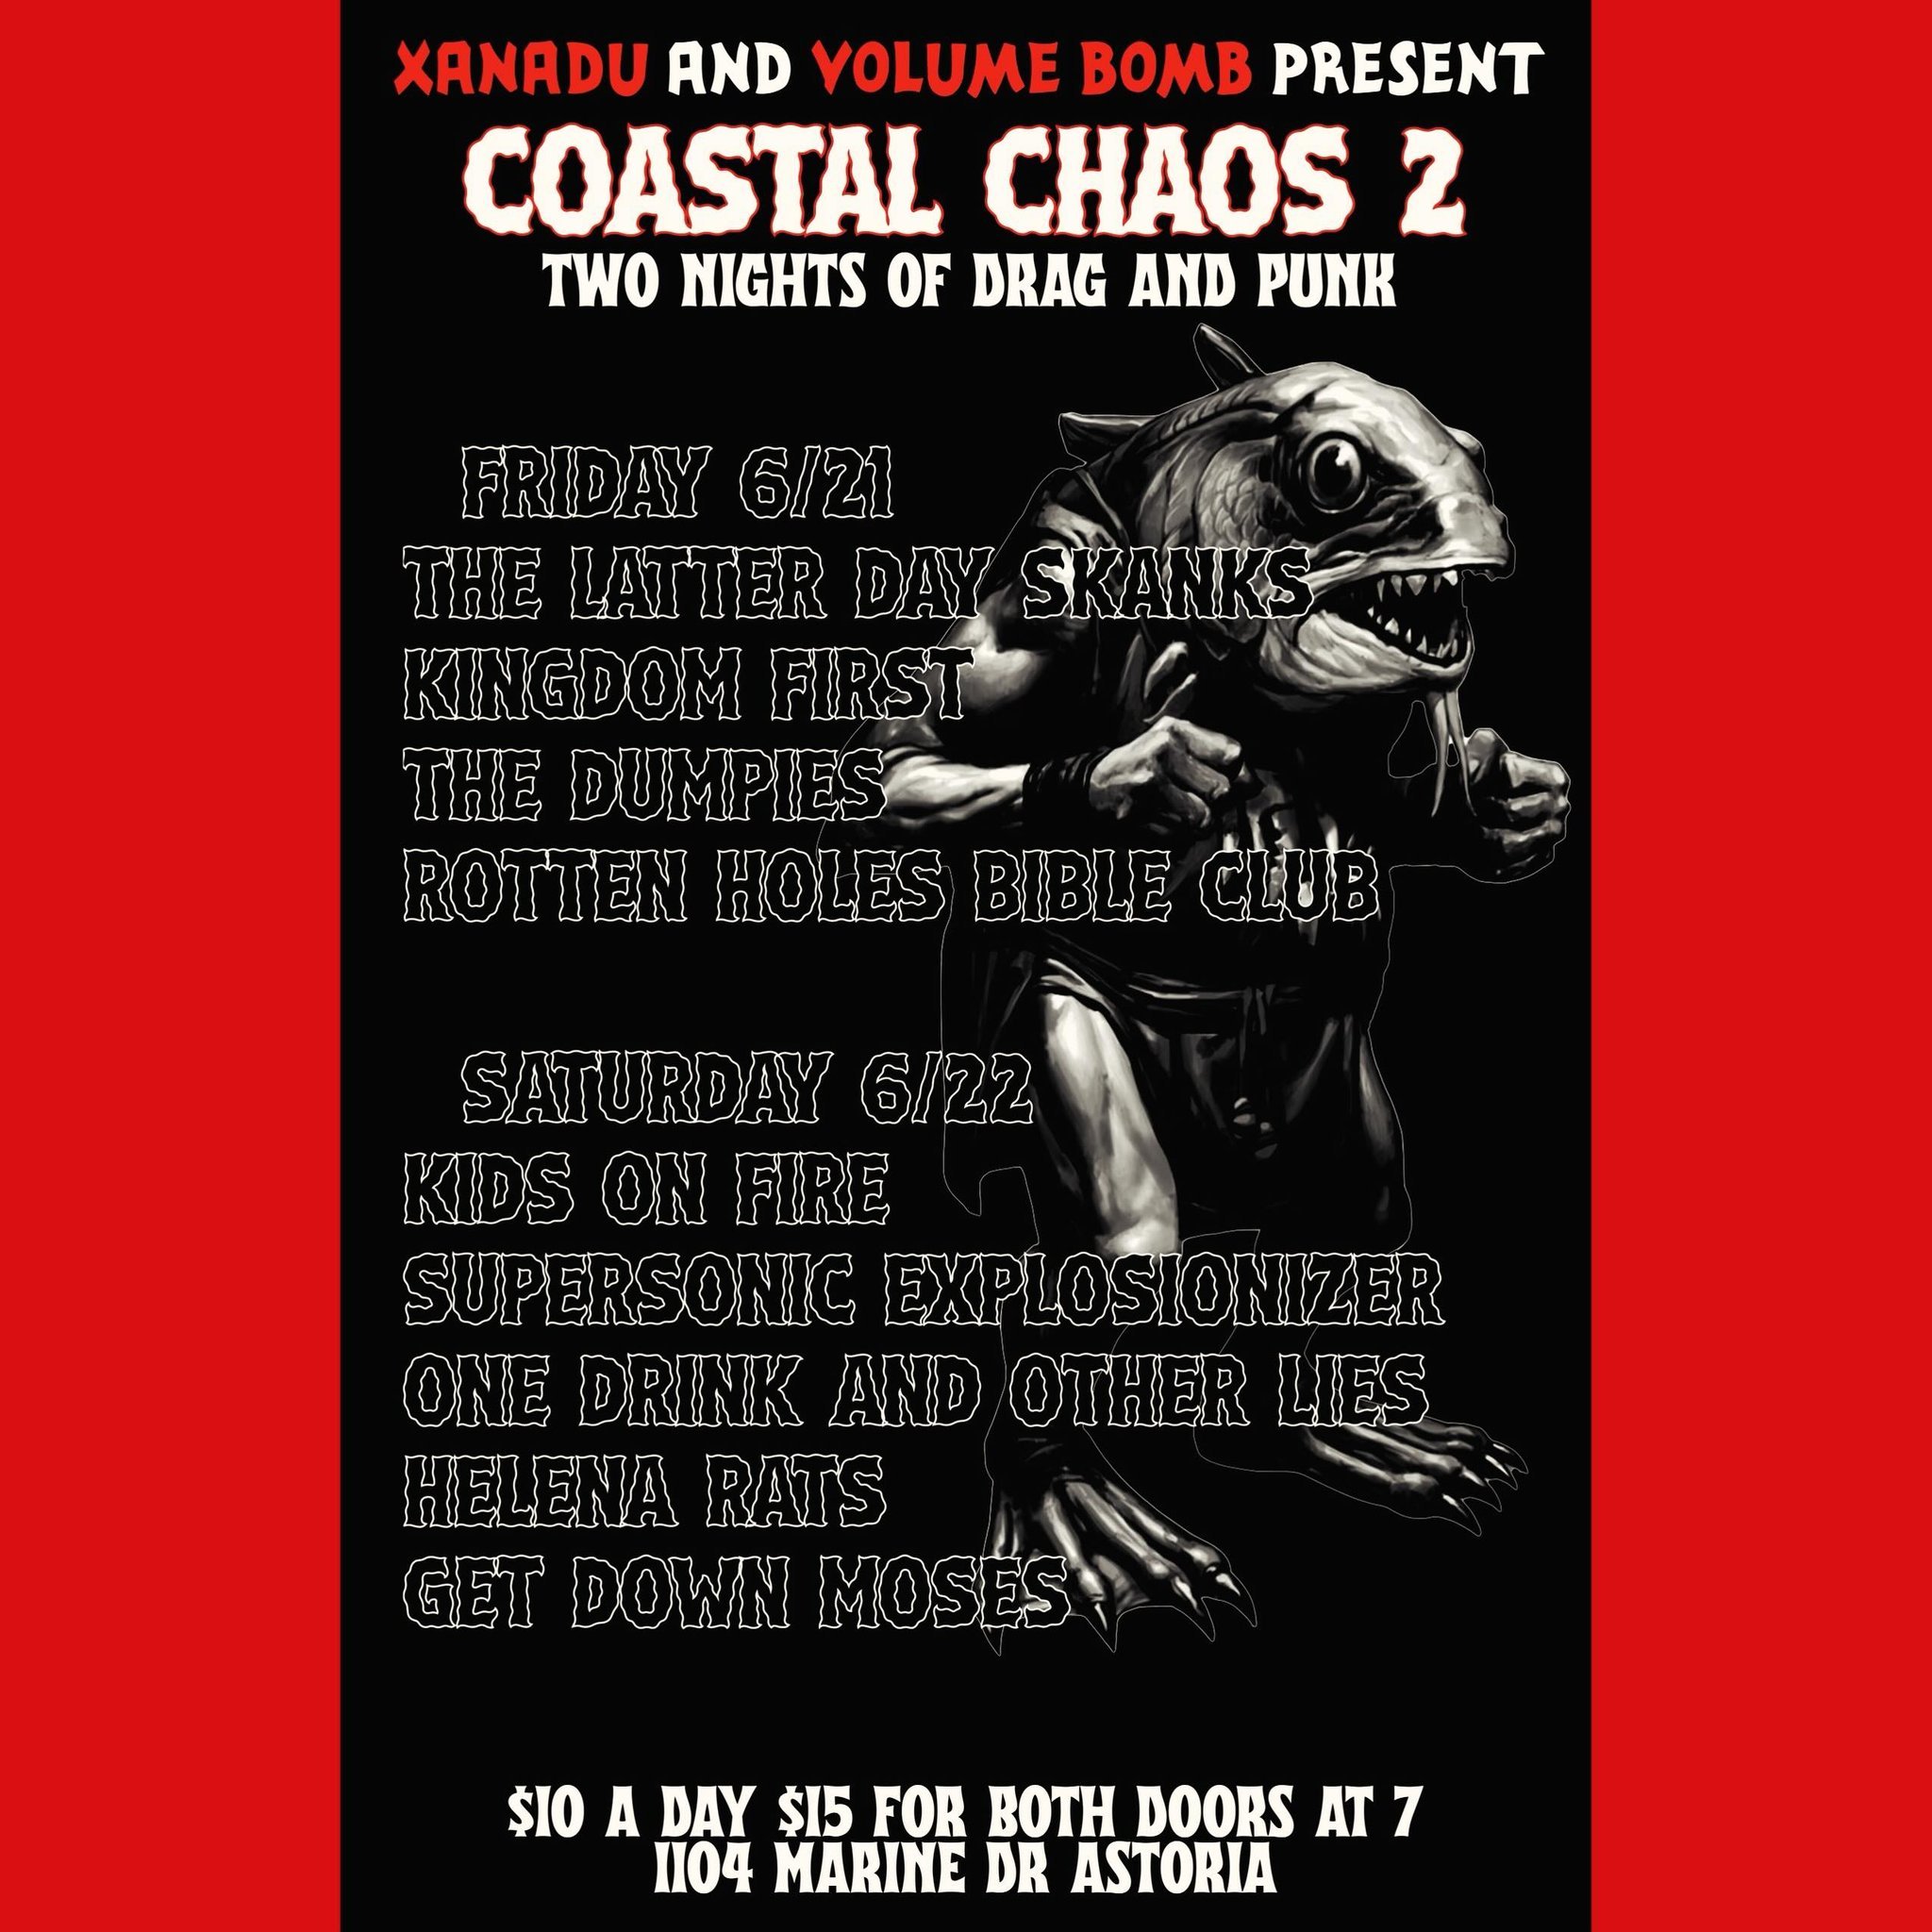 Coastal Chaos II is happening 6/21 &amp; 6/22 @xanadu_astoria in Astoria, OR. 9 bands, 2 days! Drinks, drag, punk, metal and rock &amp; roll! $10/day or $15 for the weekend. 

It&rsquo;s gonna be a rager! Mark your calendars and get some moyster shoo